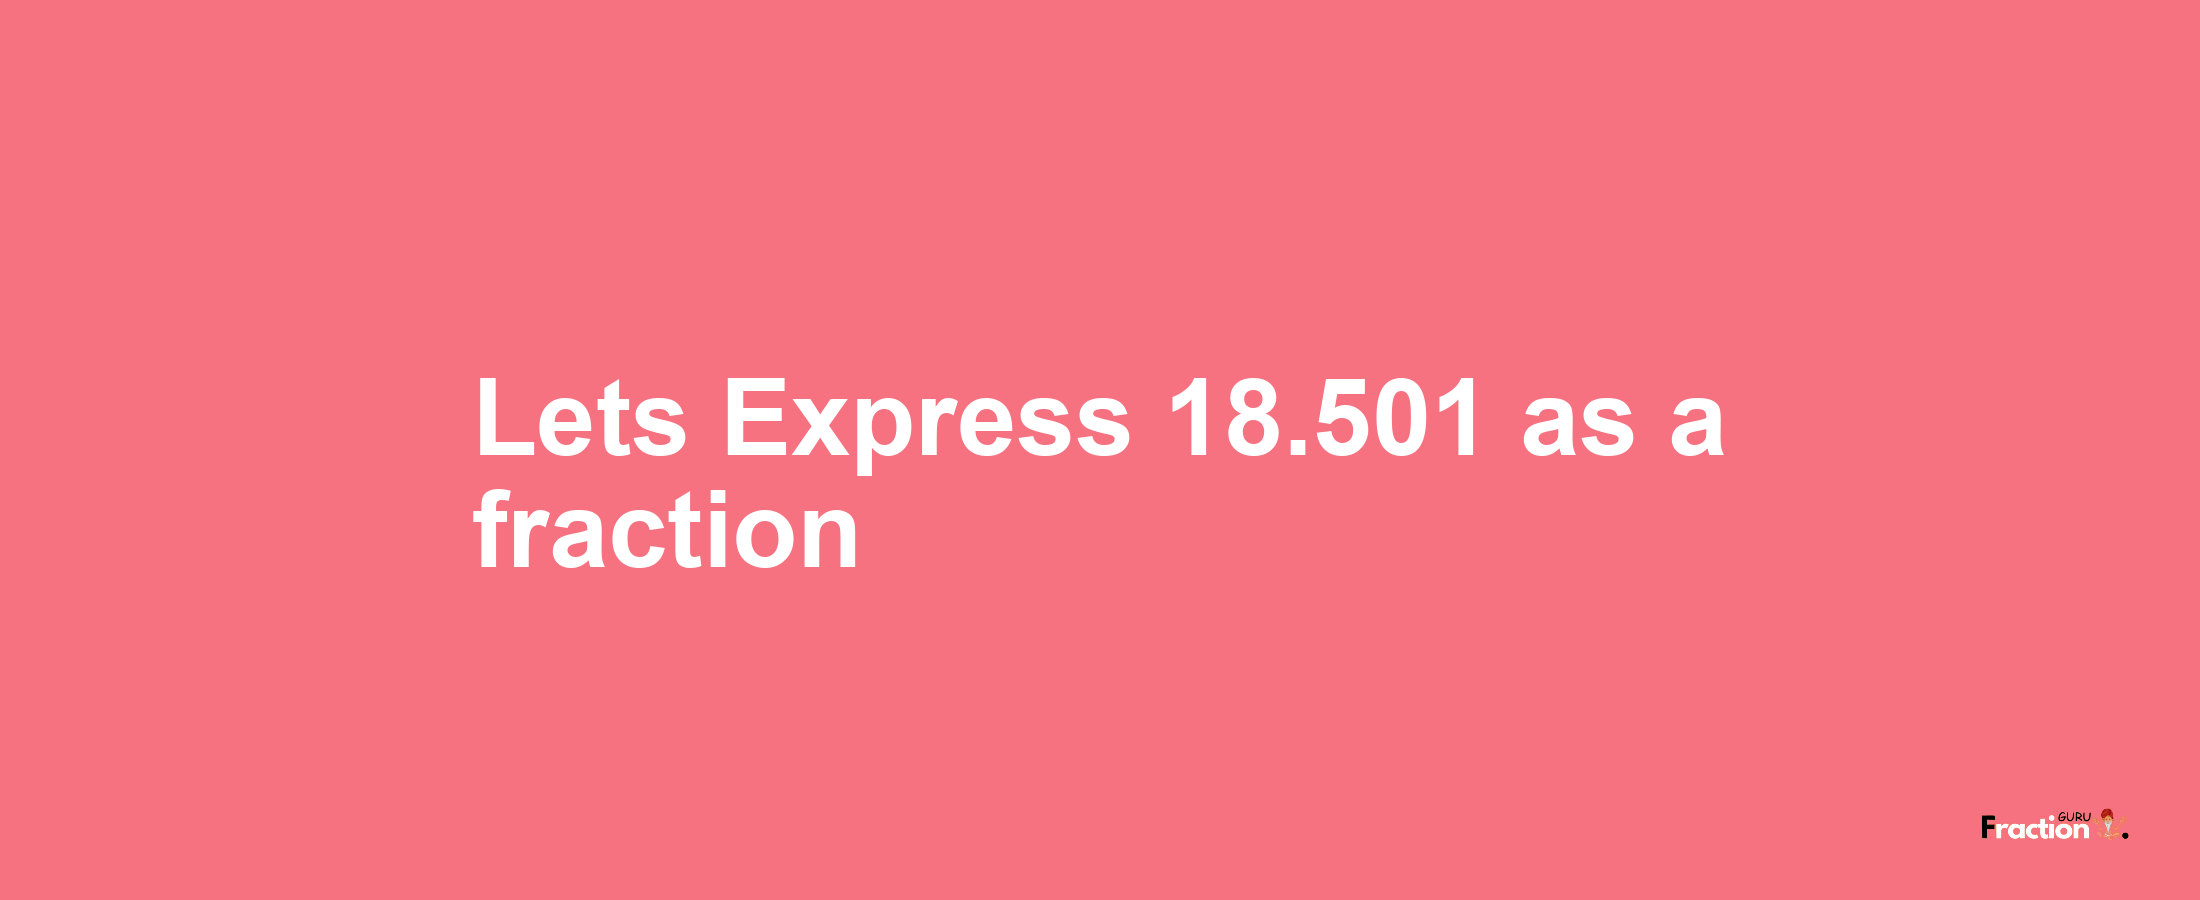 Lets Express 18.501 as afraction